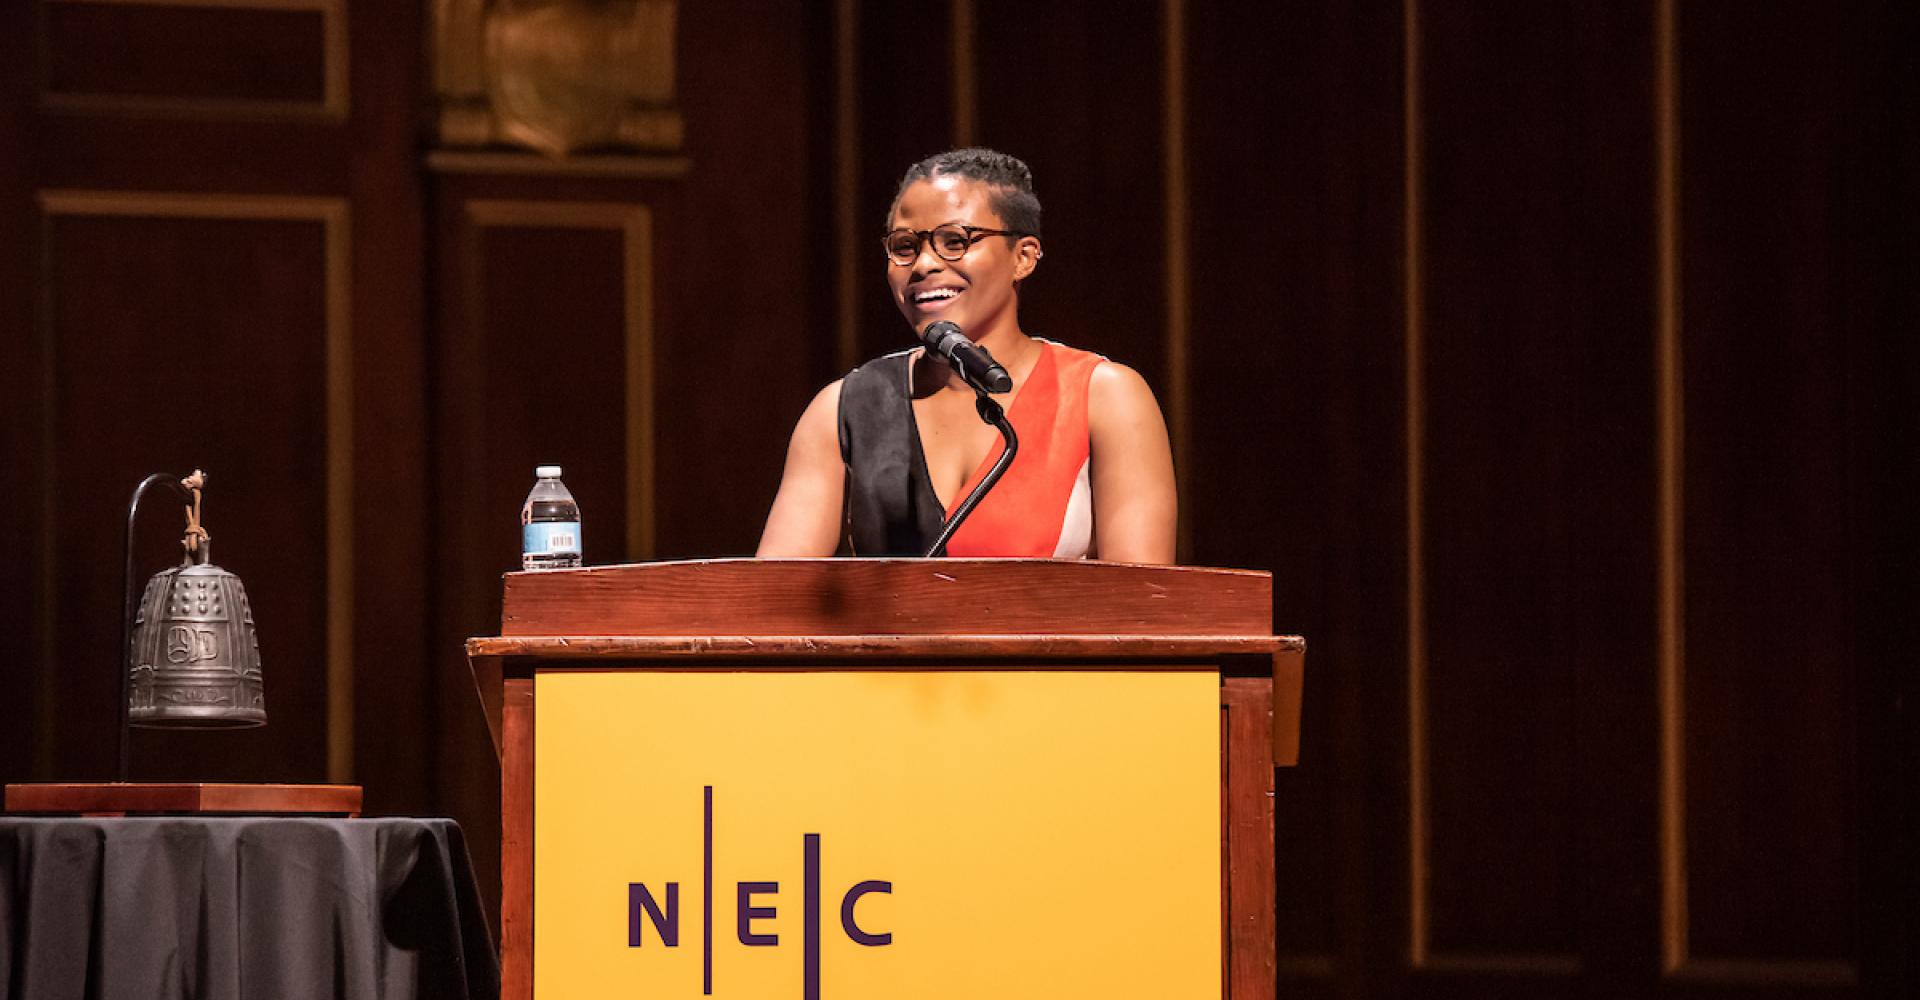 Robyn Smith delivers remarks at an NEC podium in Jordan Hall.